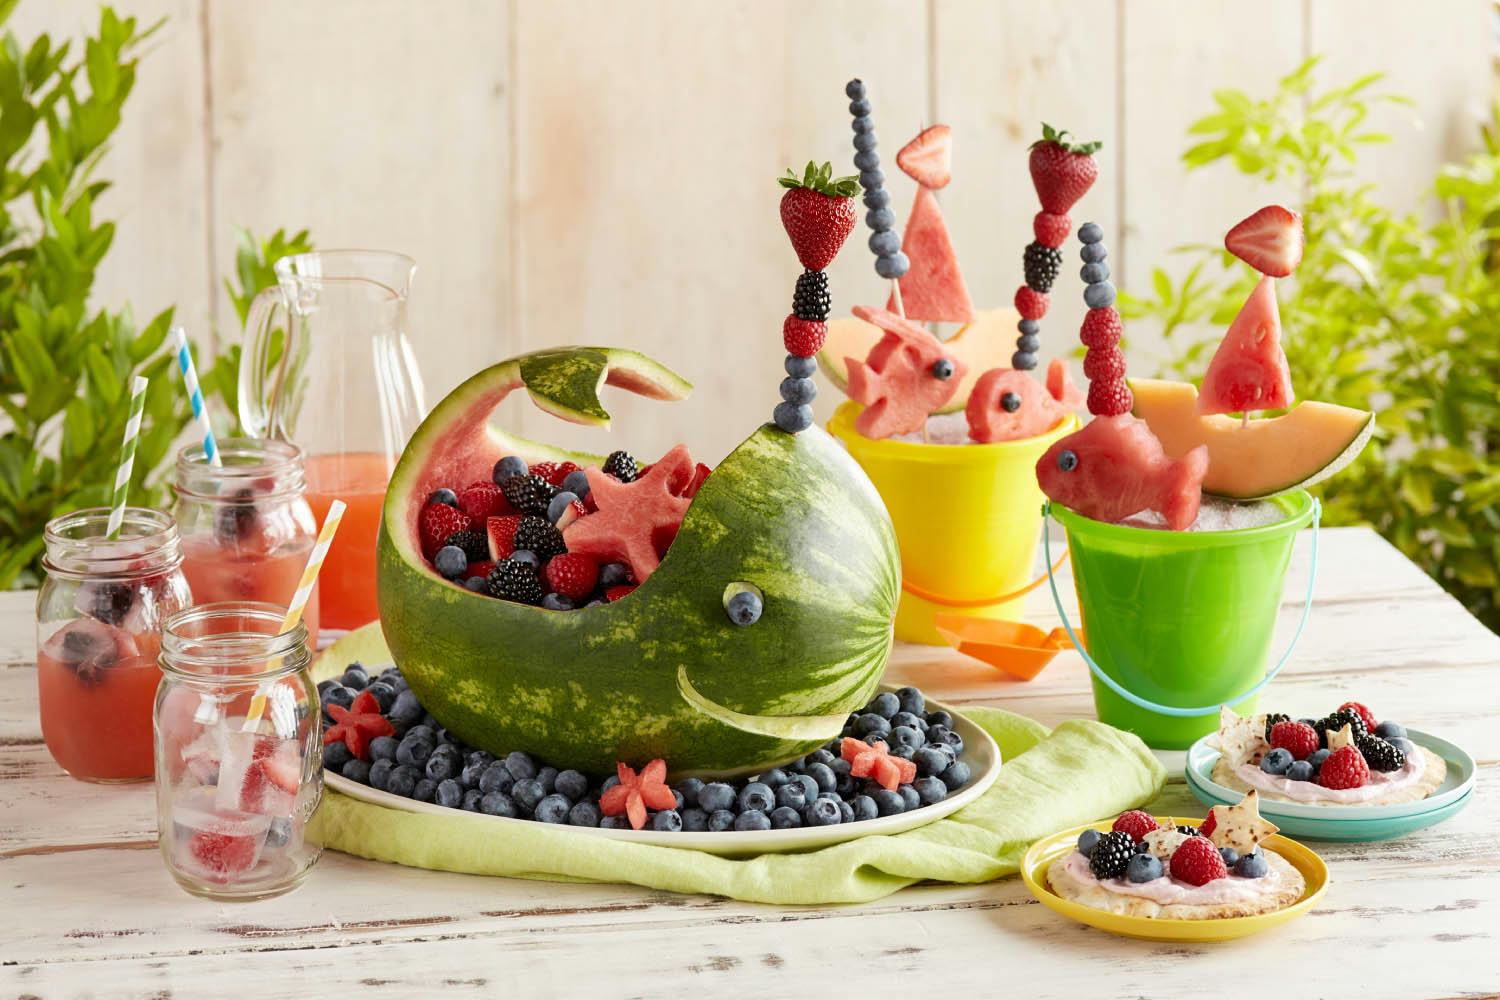 Splash into Summer with a Berry Beach Party